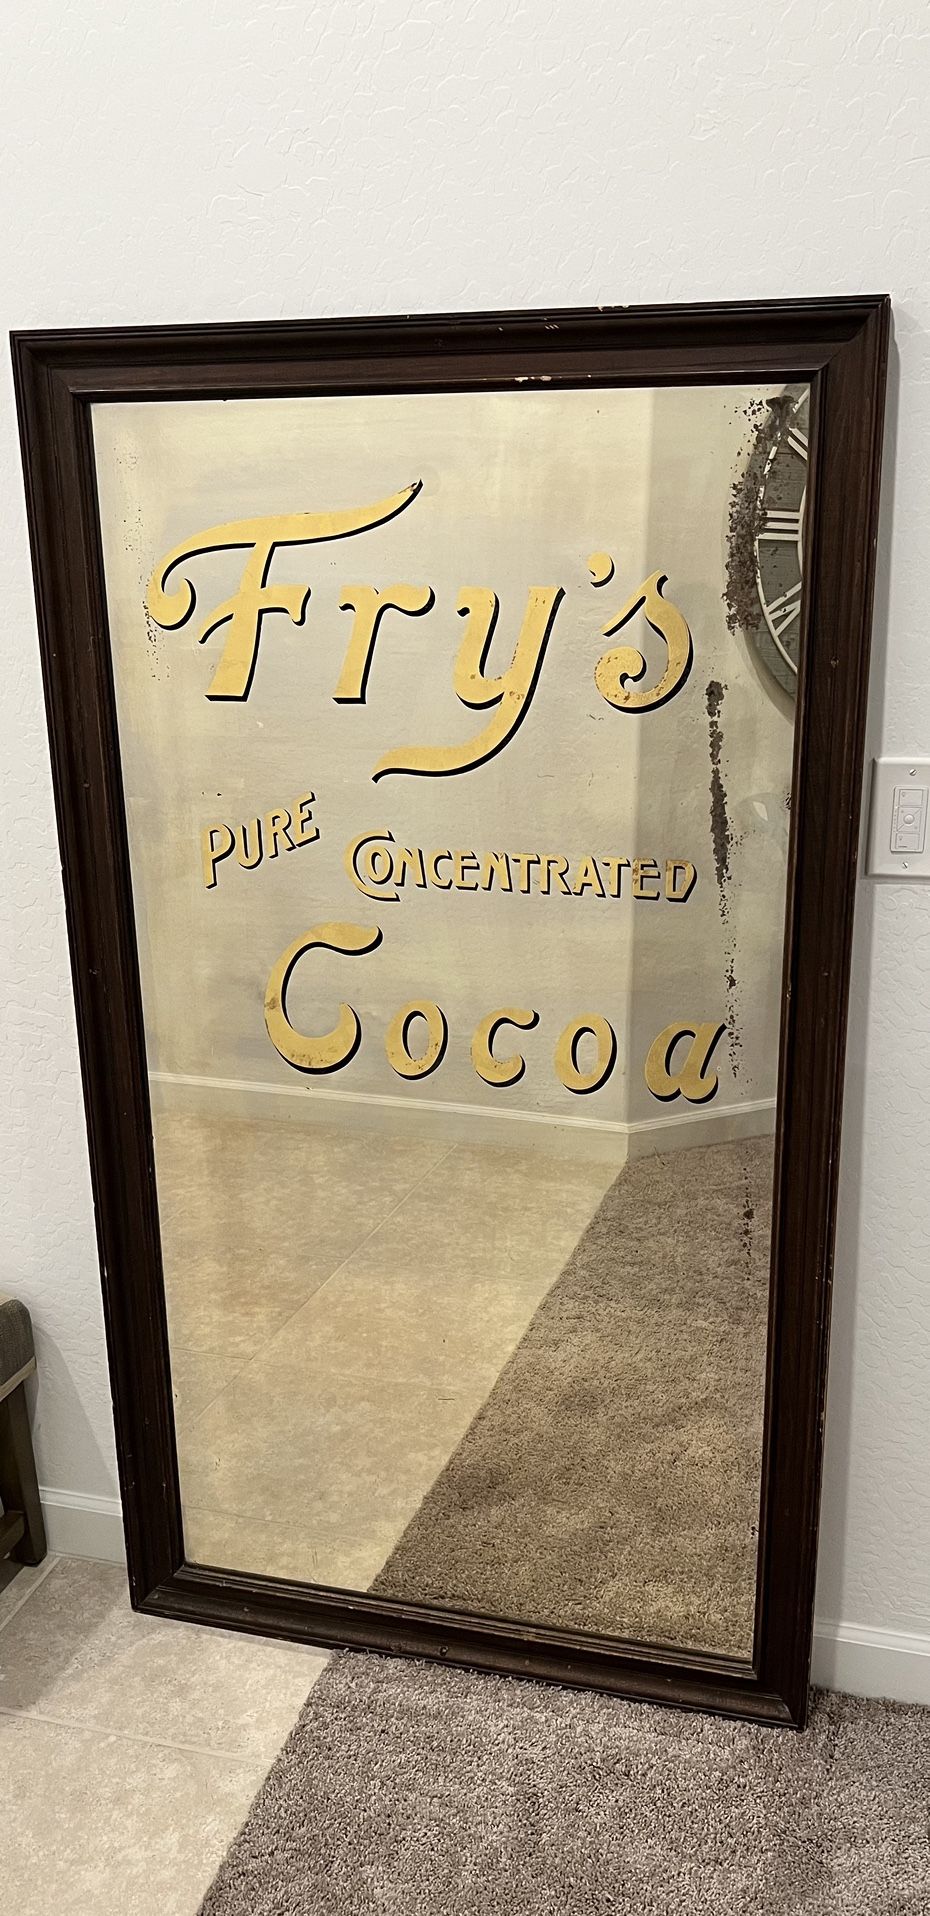 Huge Vintage Fry’s Pure Concentrated Cocoa Mirror